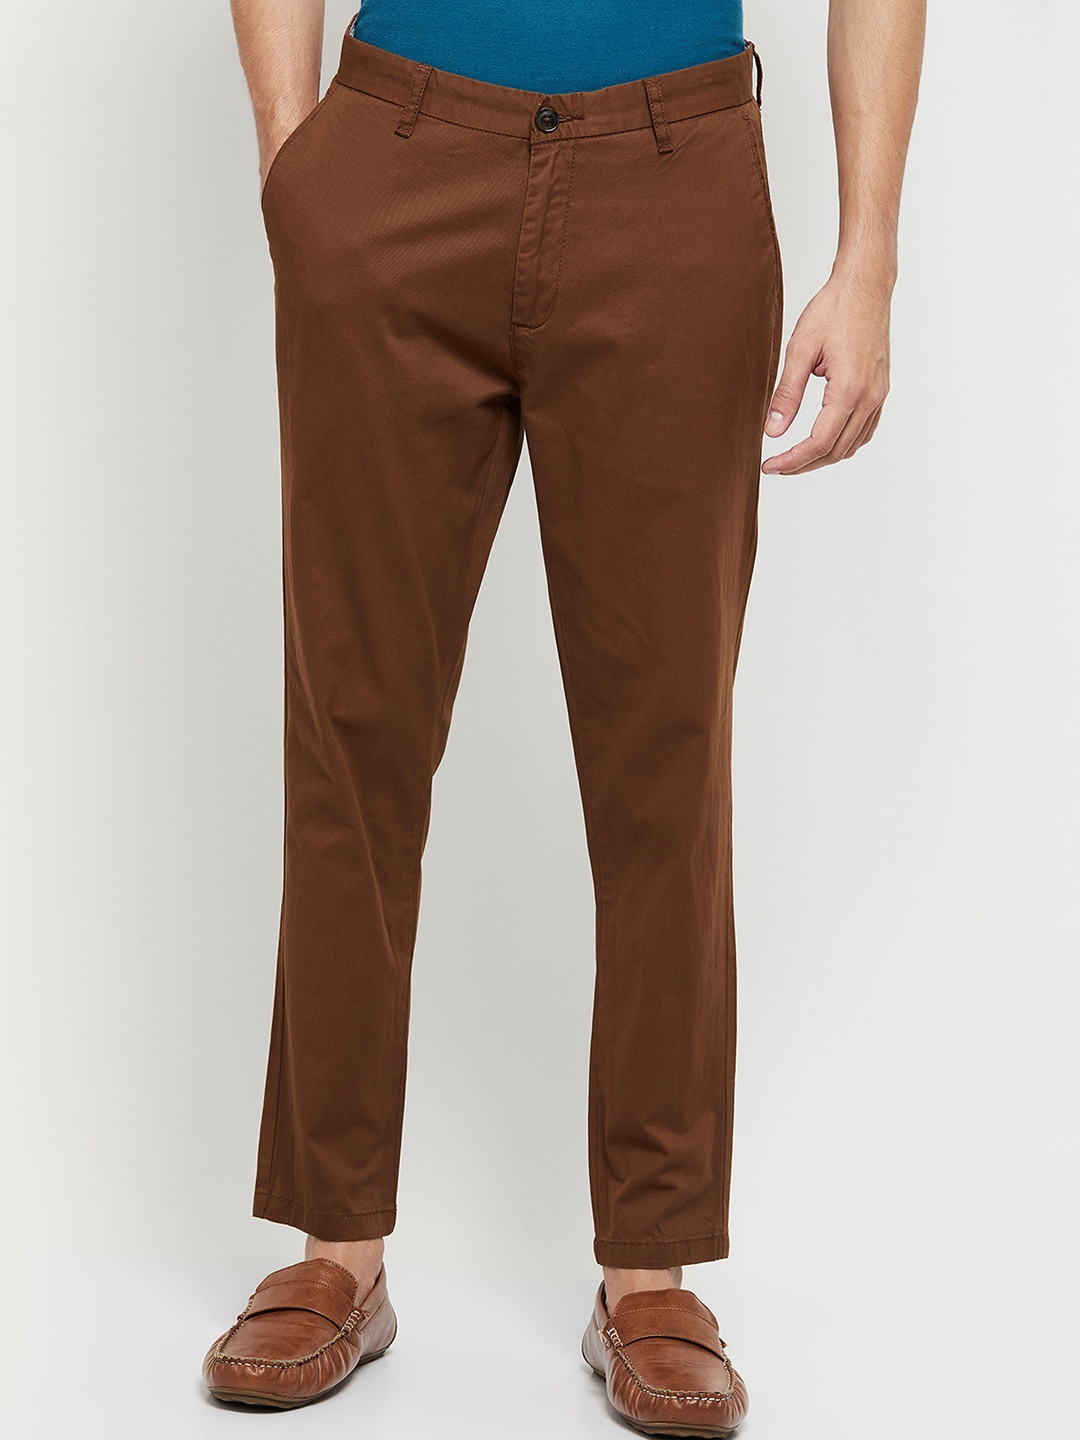 Buy Max Men Brown Textured Trousers - Trousers for Men 19062868 | Myntra